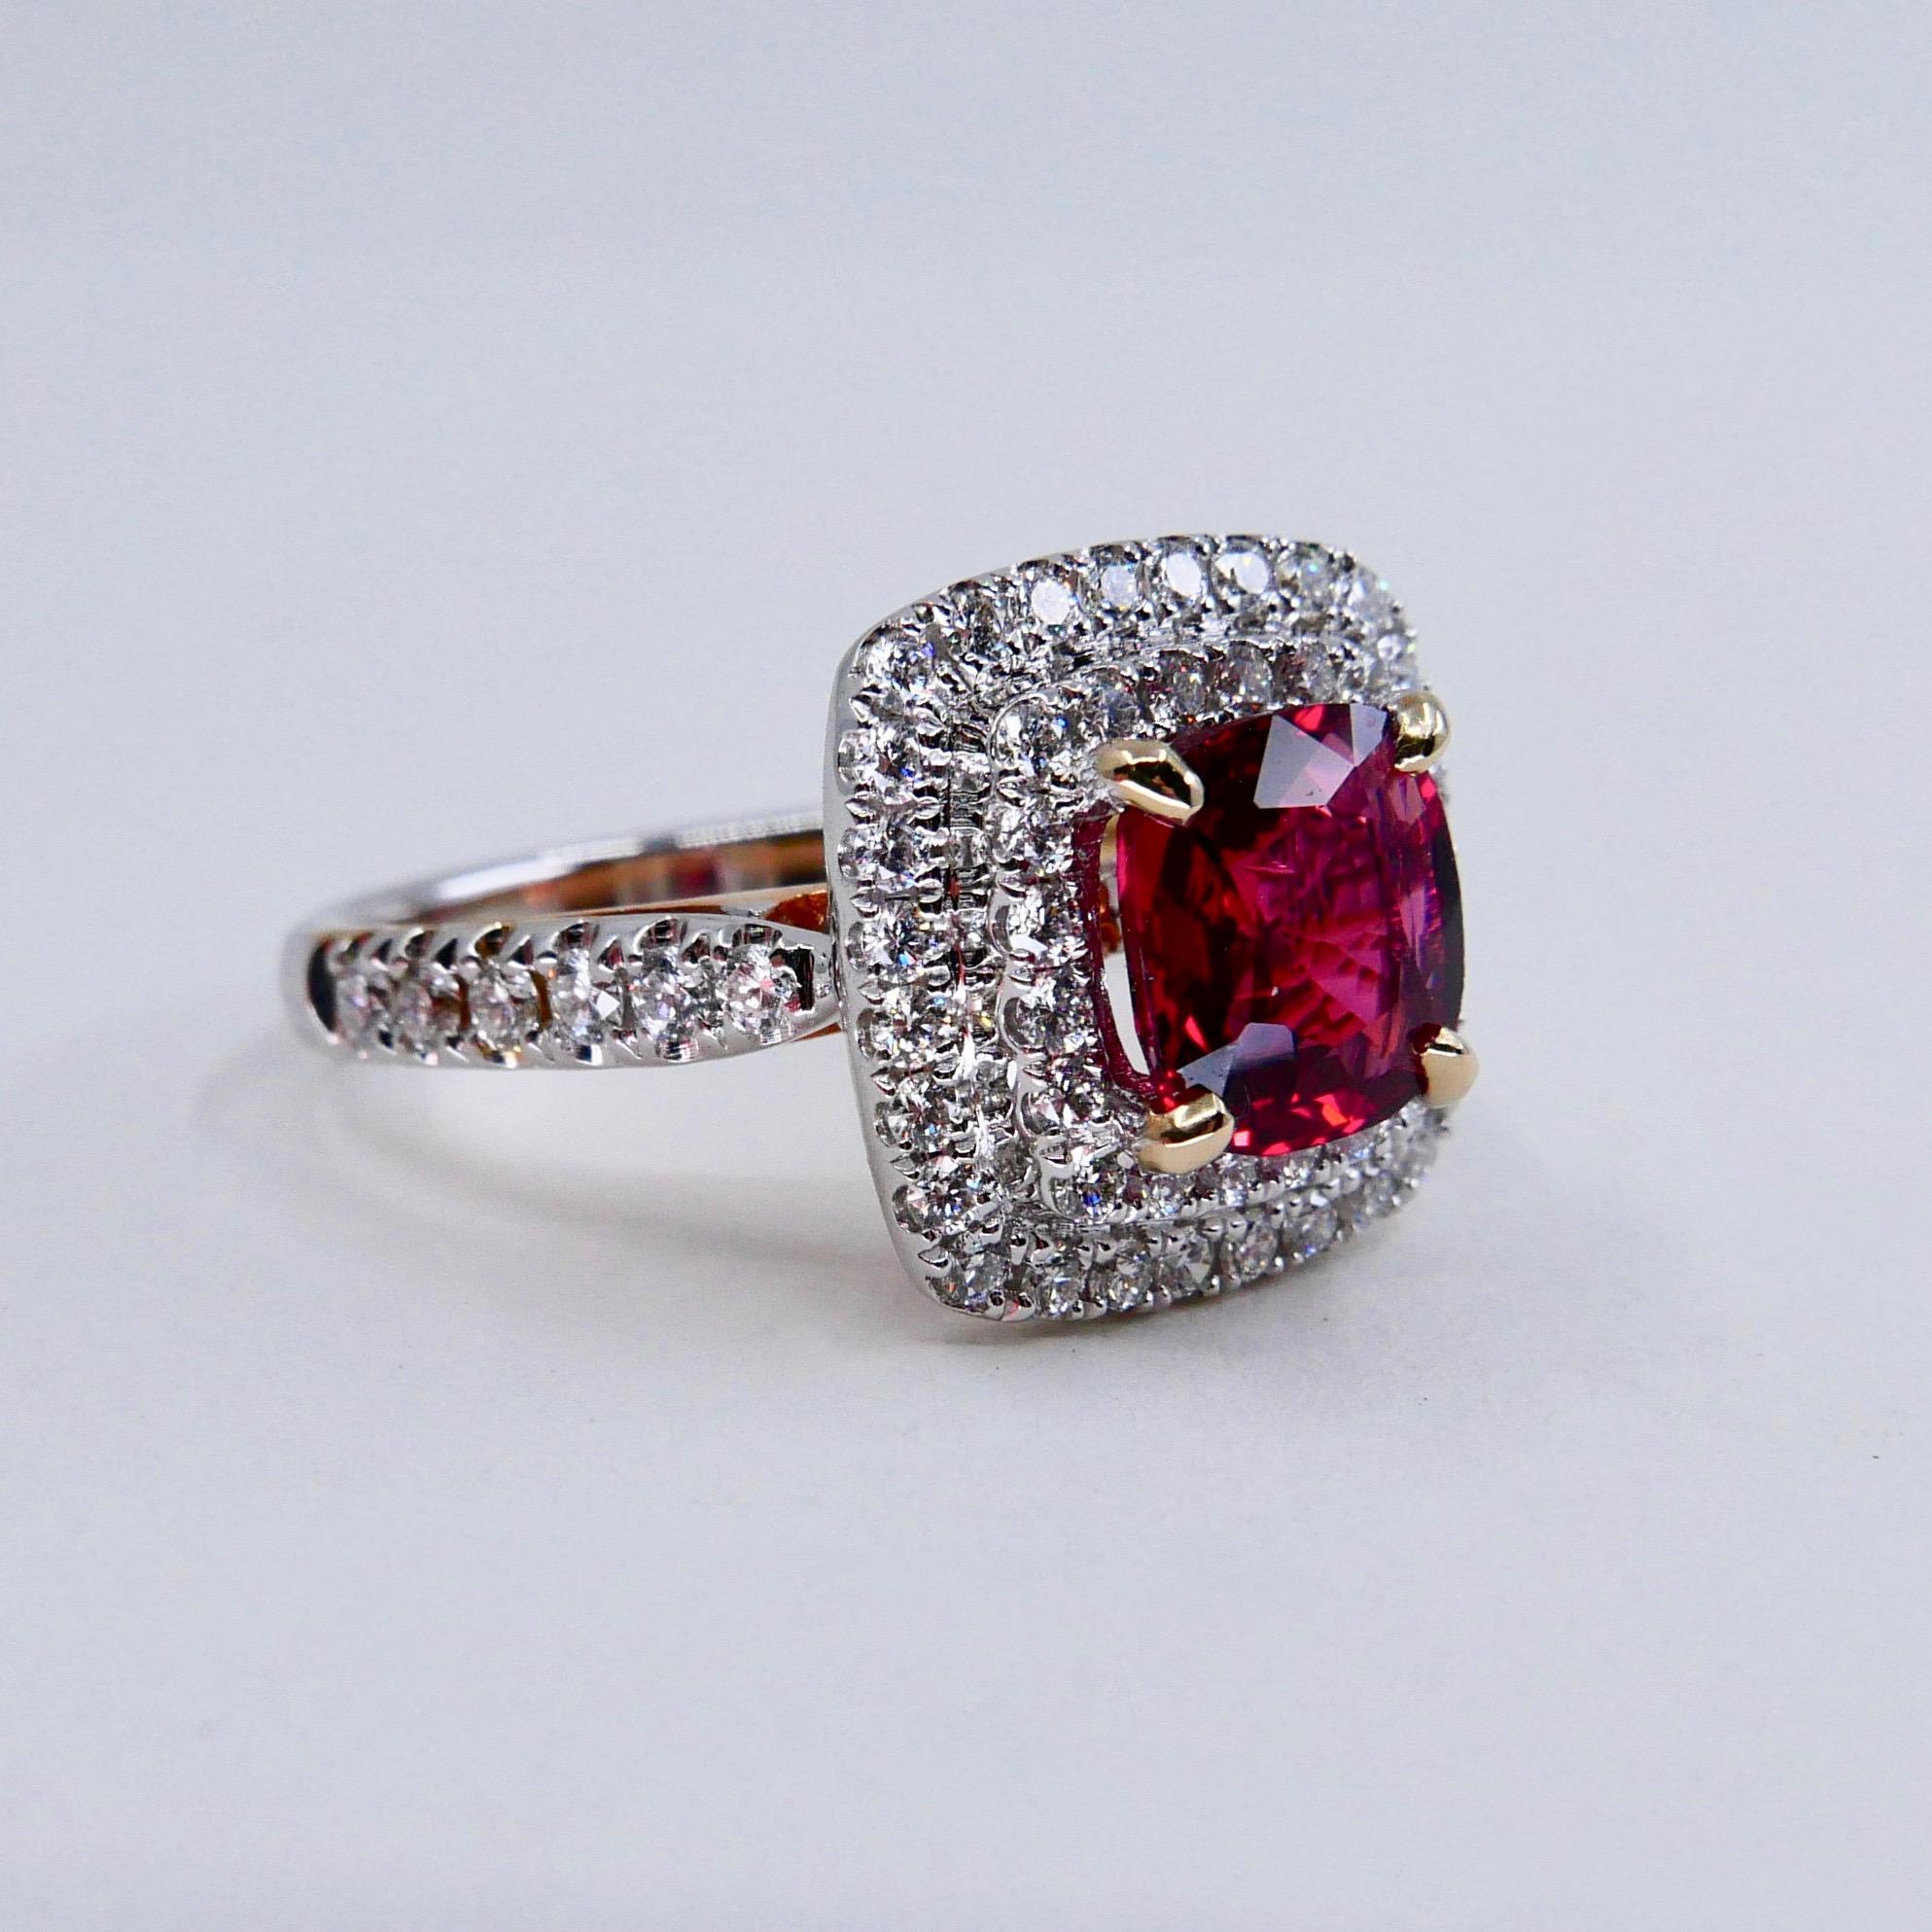 Contemporary Natural Red Spinel 1.51 Carat and Diamond Ring 18K Two-Tone White and Rose Gold